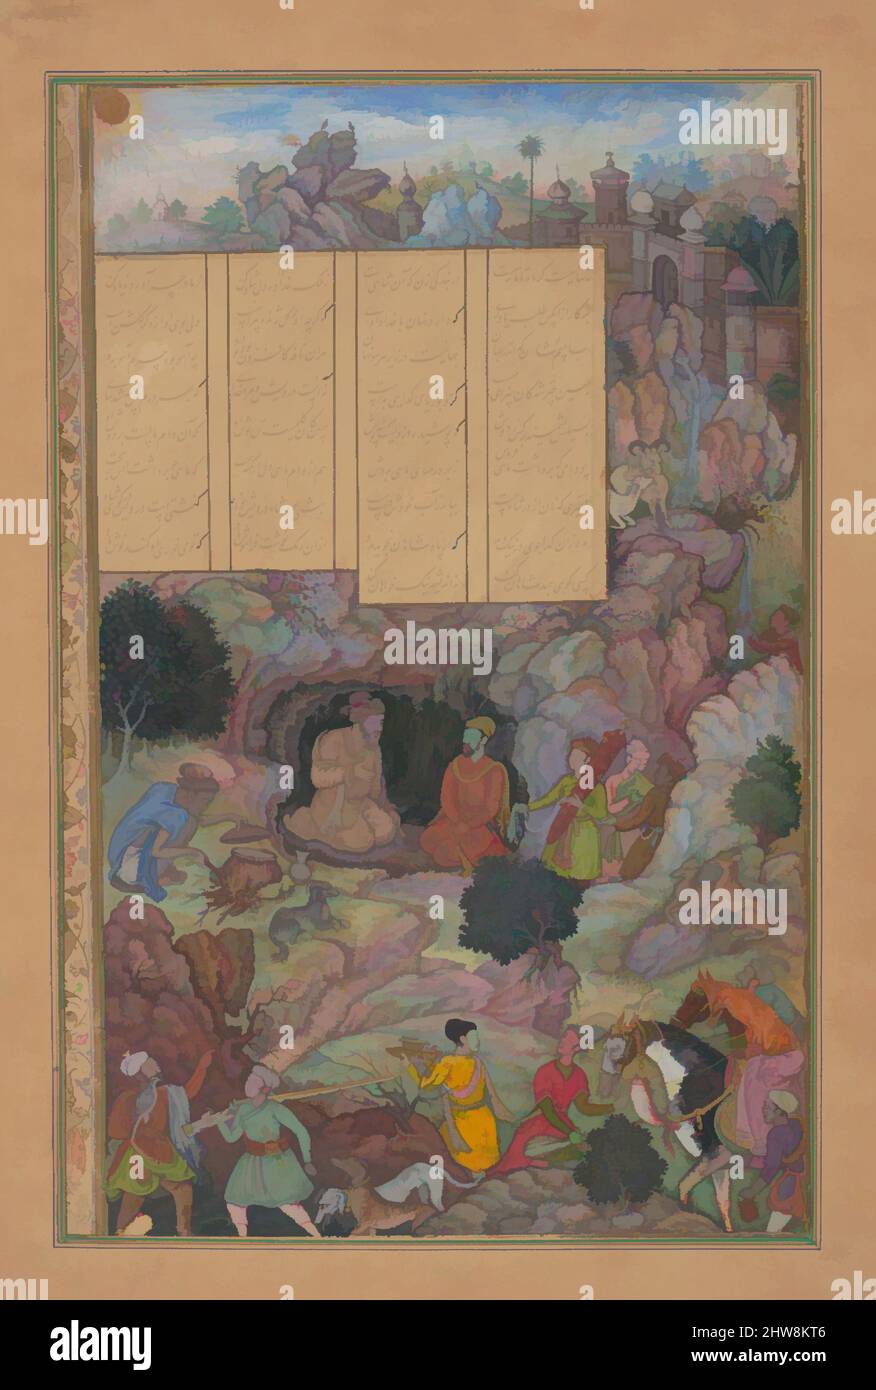 Art inspired by Alexander Visits the Sage Plato in his Mountain Cave', Folio from a Khamsa (Quintet) of Amir Khusrau Dihlavi, 1597–98, Attributed to India, Main support: Ink, opaque watercolor, gold on paper, Page: 9 7/8 x 6 1/4 in. (25.1 x 15.9 cm), Codices, attributed to Basawan (, Classic works modernized by Artotop with a splash of modernity. Shapes, color and value, eye-catching visual impact on art. Emotions through freedom of artworks in a contemporary way. A timeless message pursuing a wildly creative new direction. Artists turning to the digital medium and creating the Artotop NFT Stock Photo